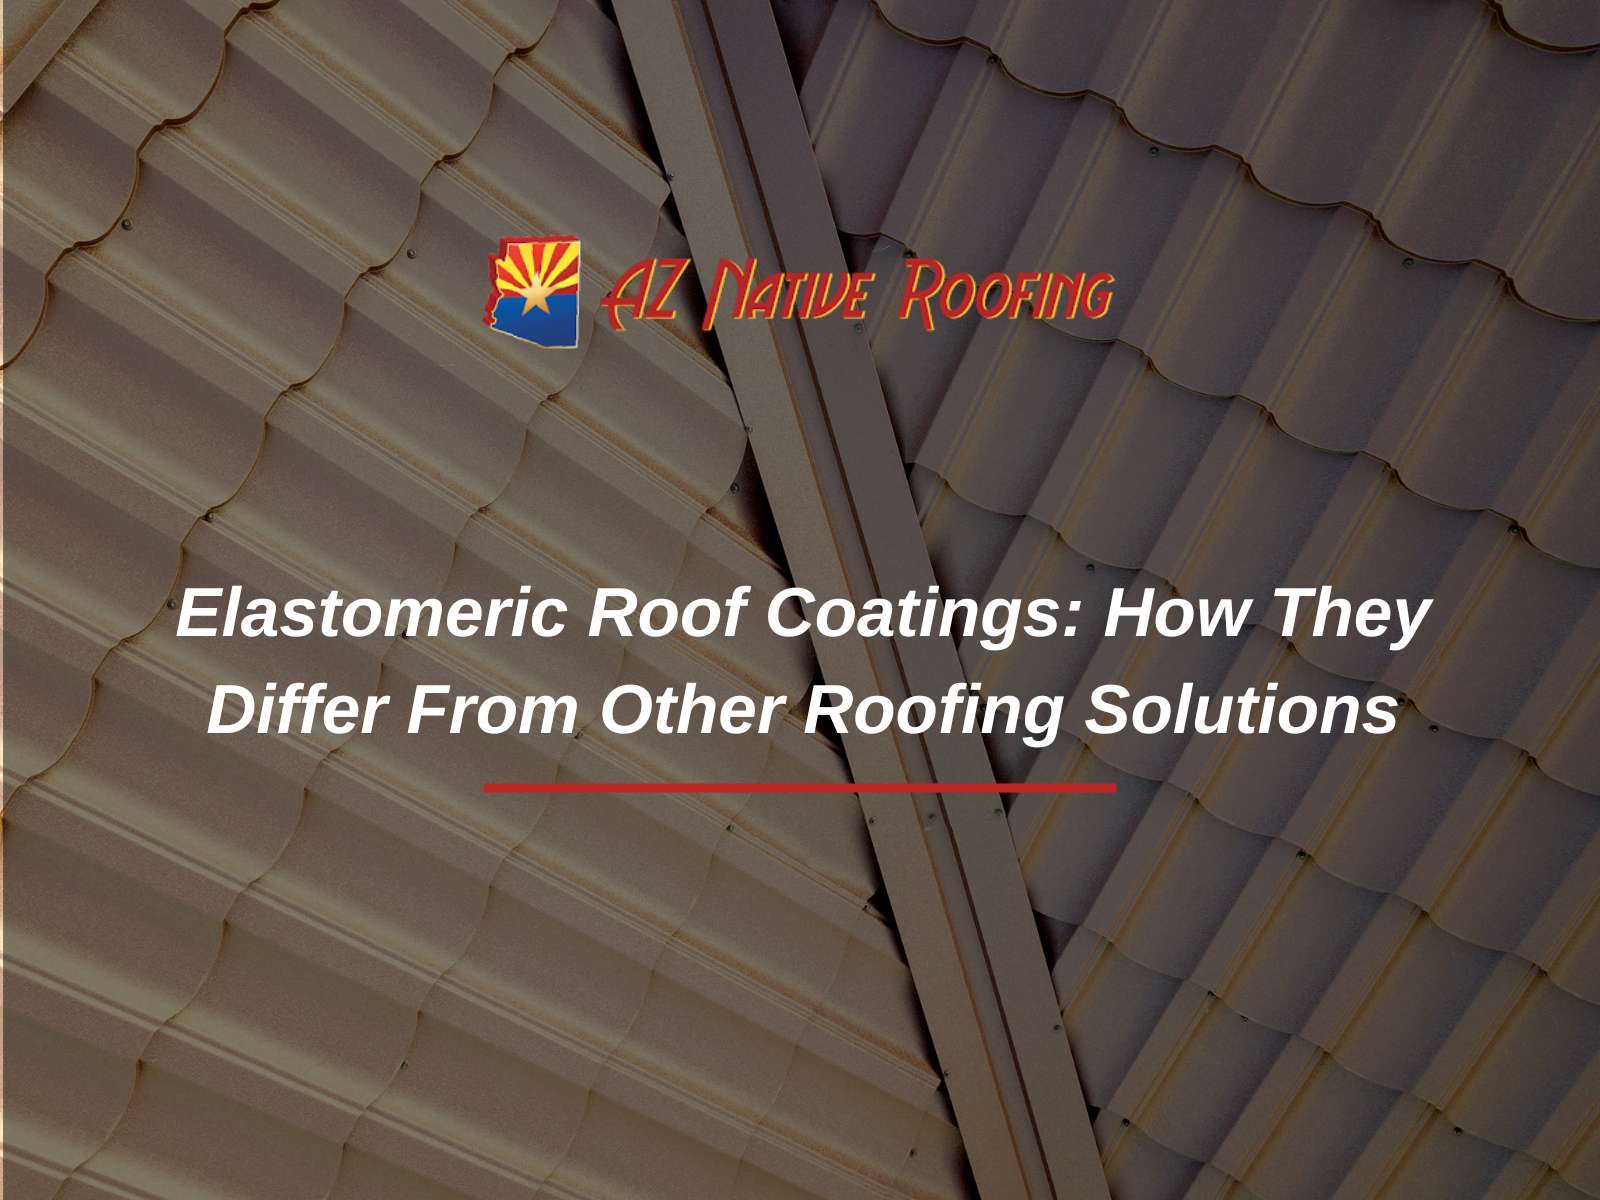 Elastomeric Roof Coatings How They Differ From Other Roofing Solutions